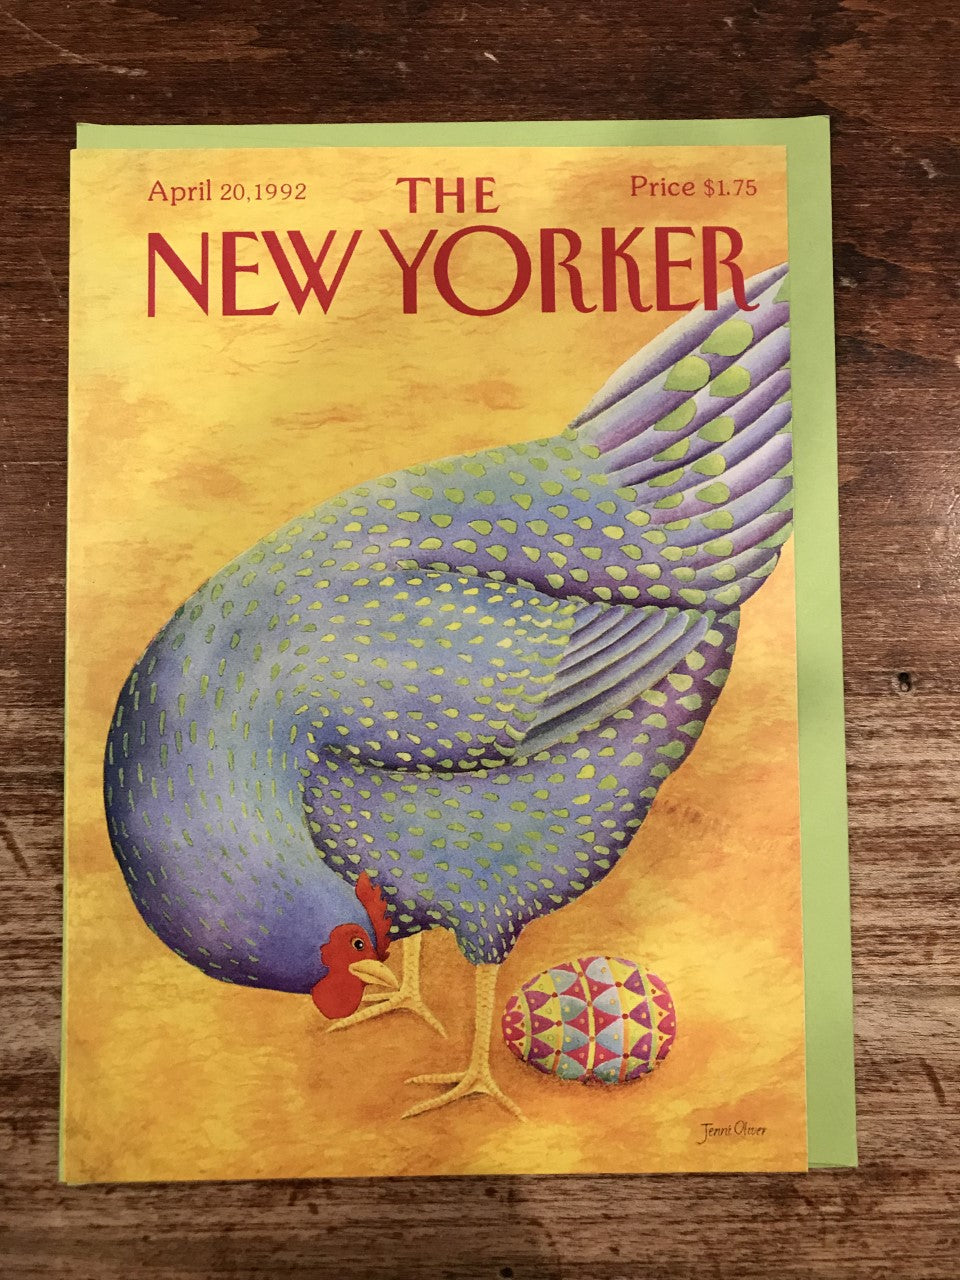 The New Yorker Easter Card-Hen Lays Eggs